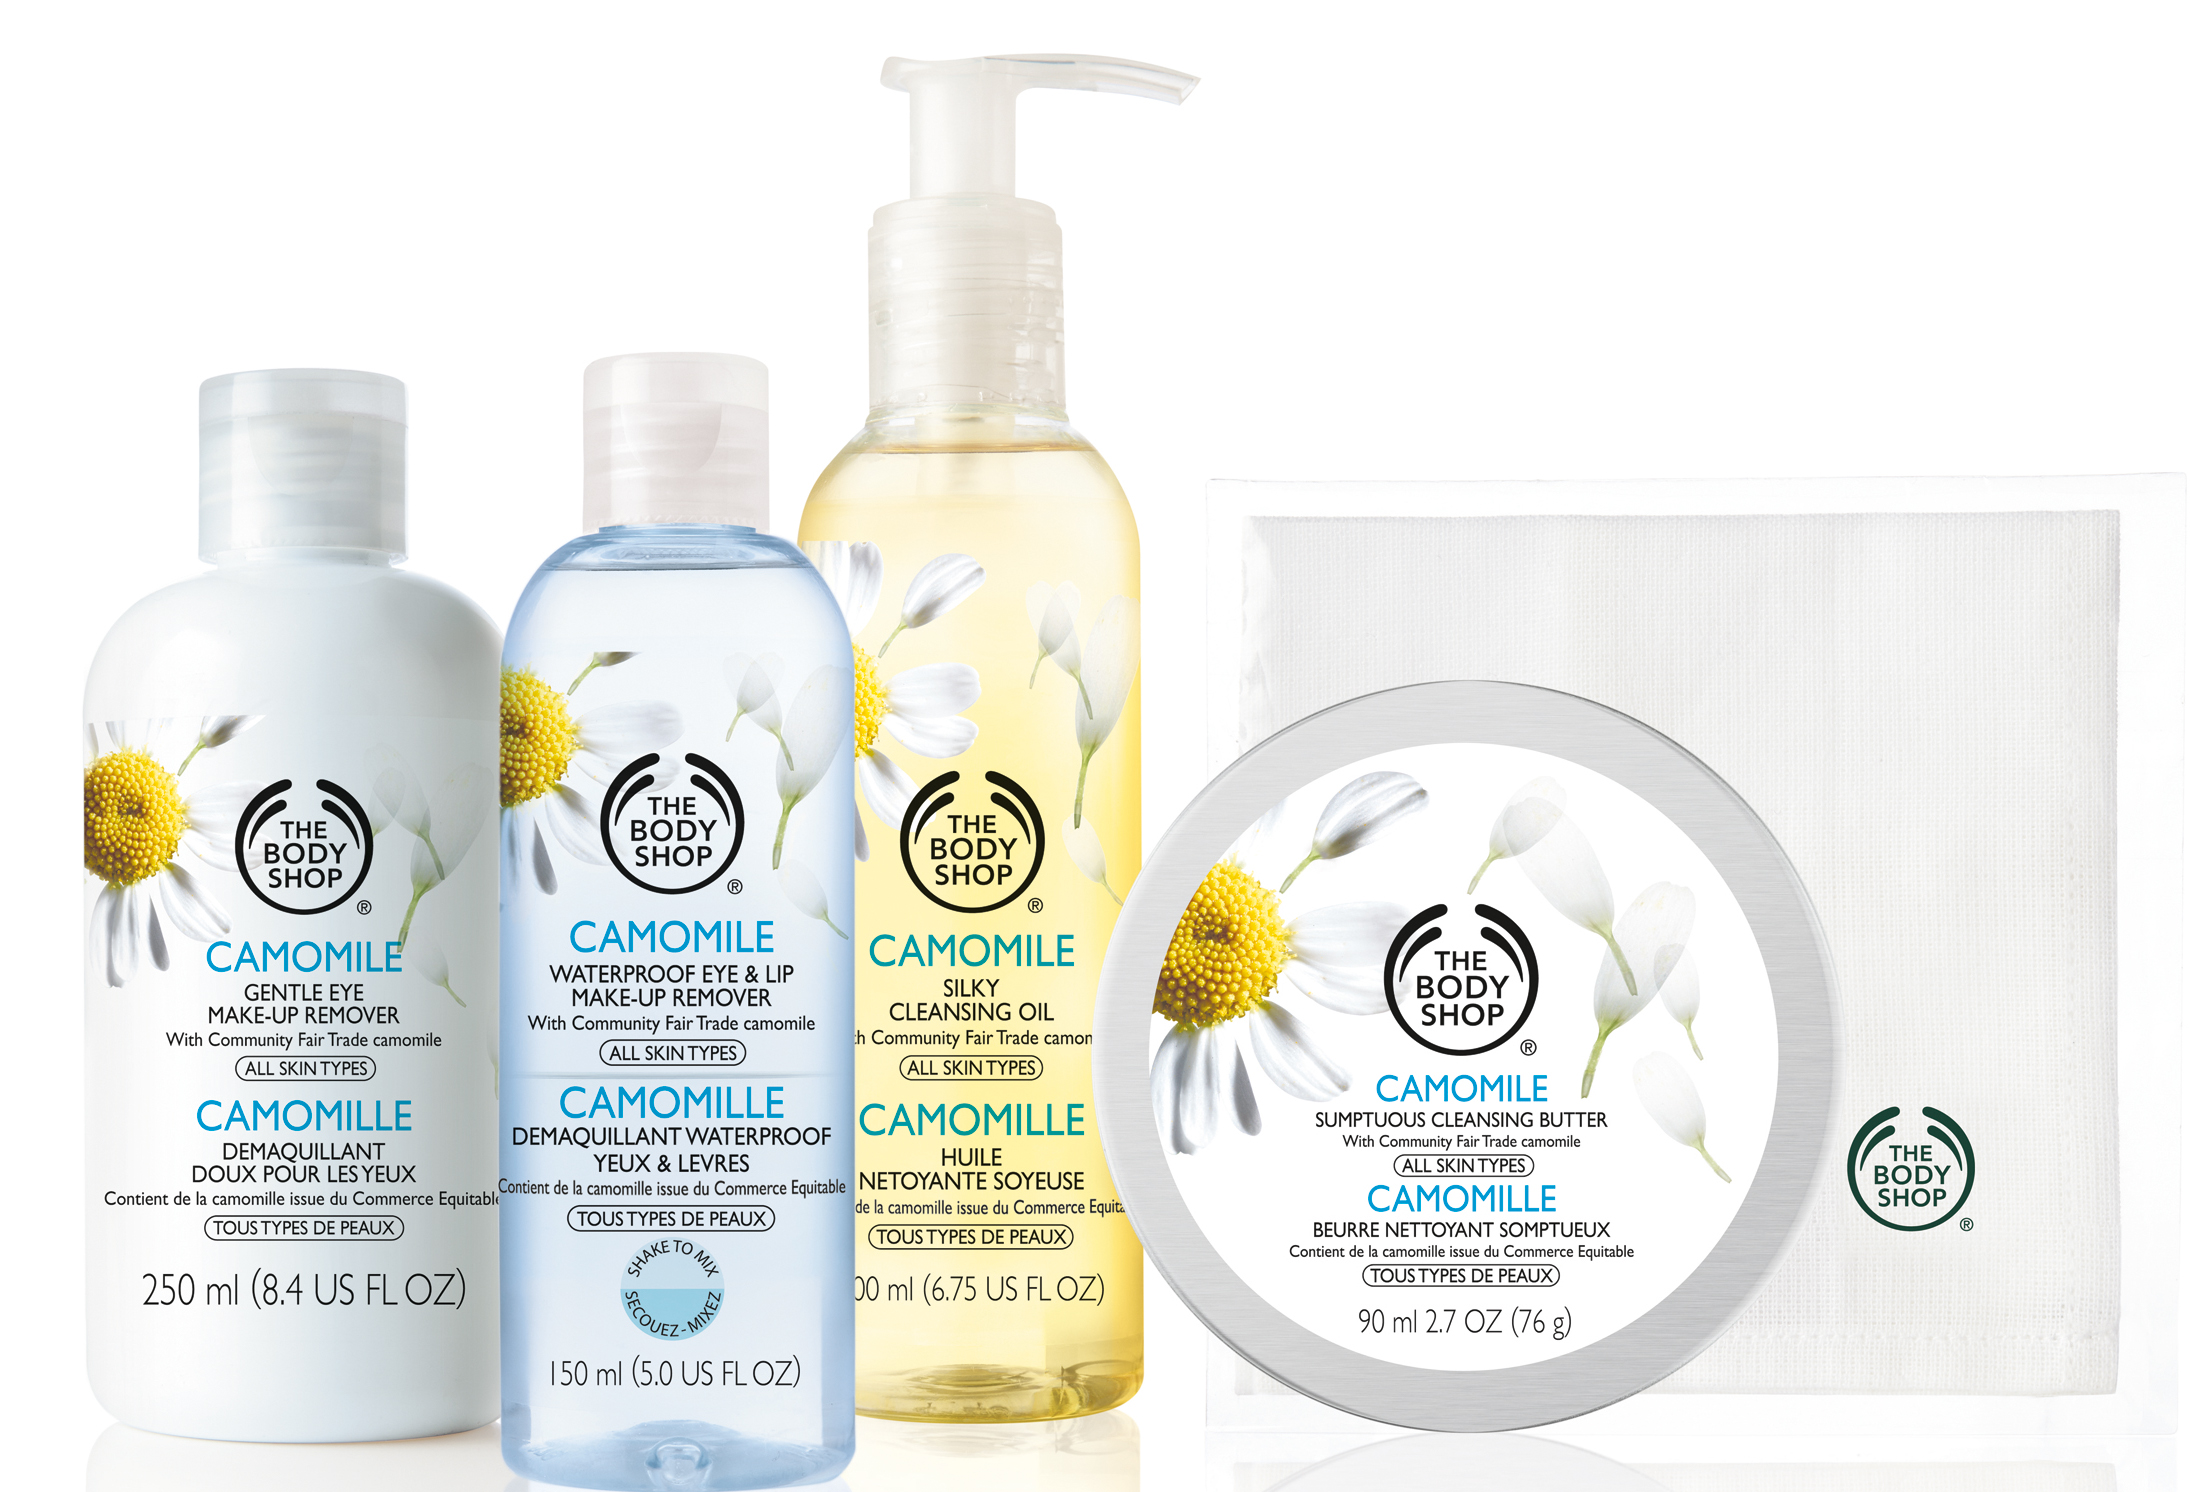 The Body Shop Camomile group